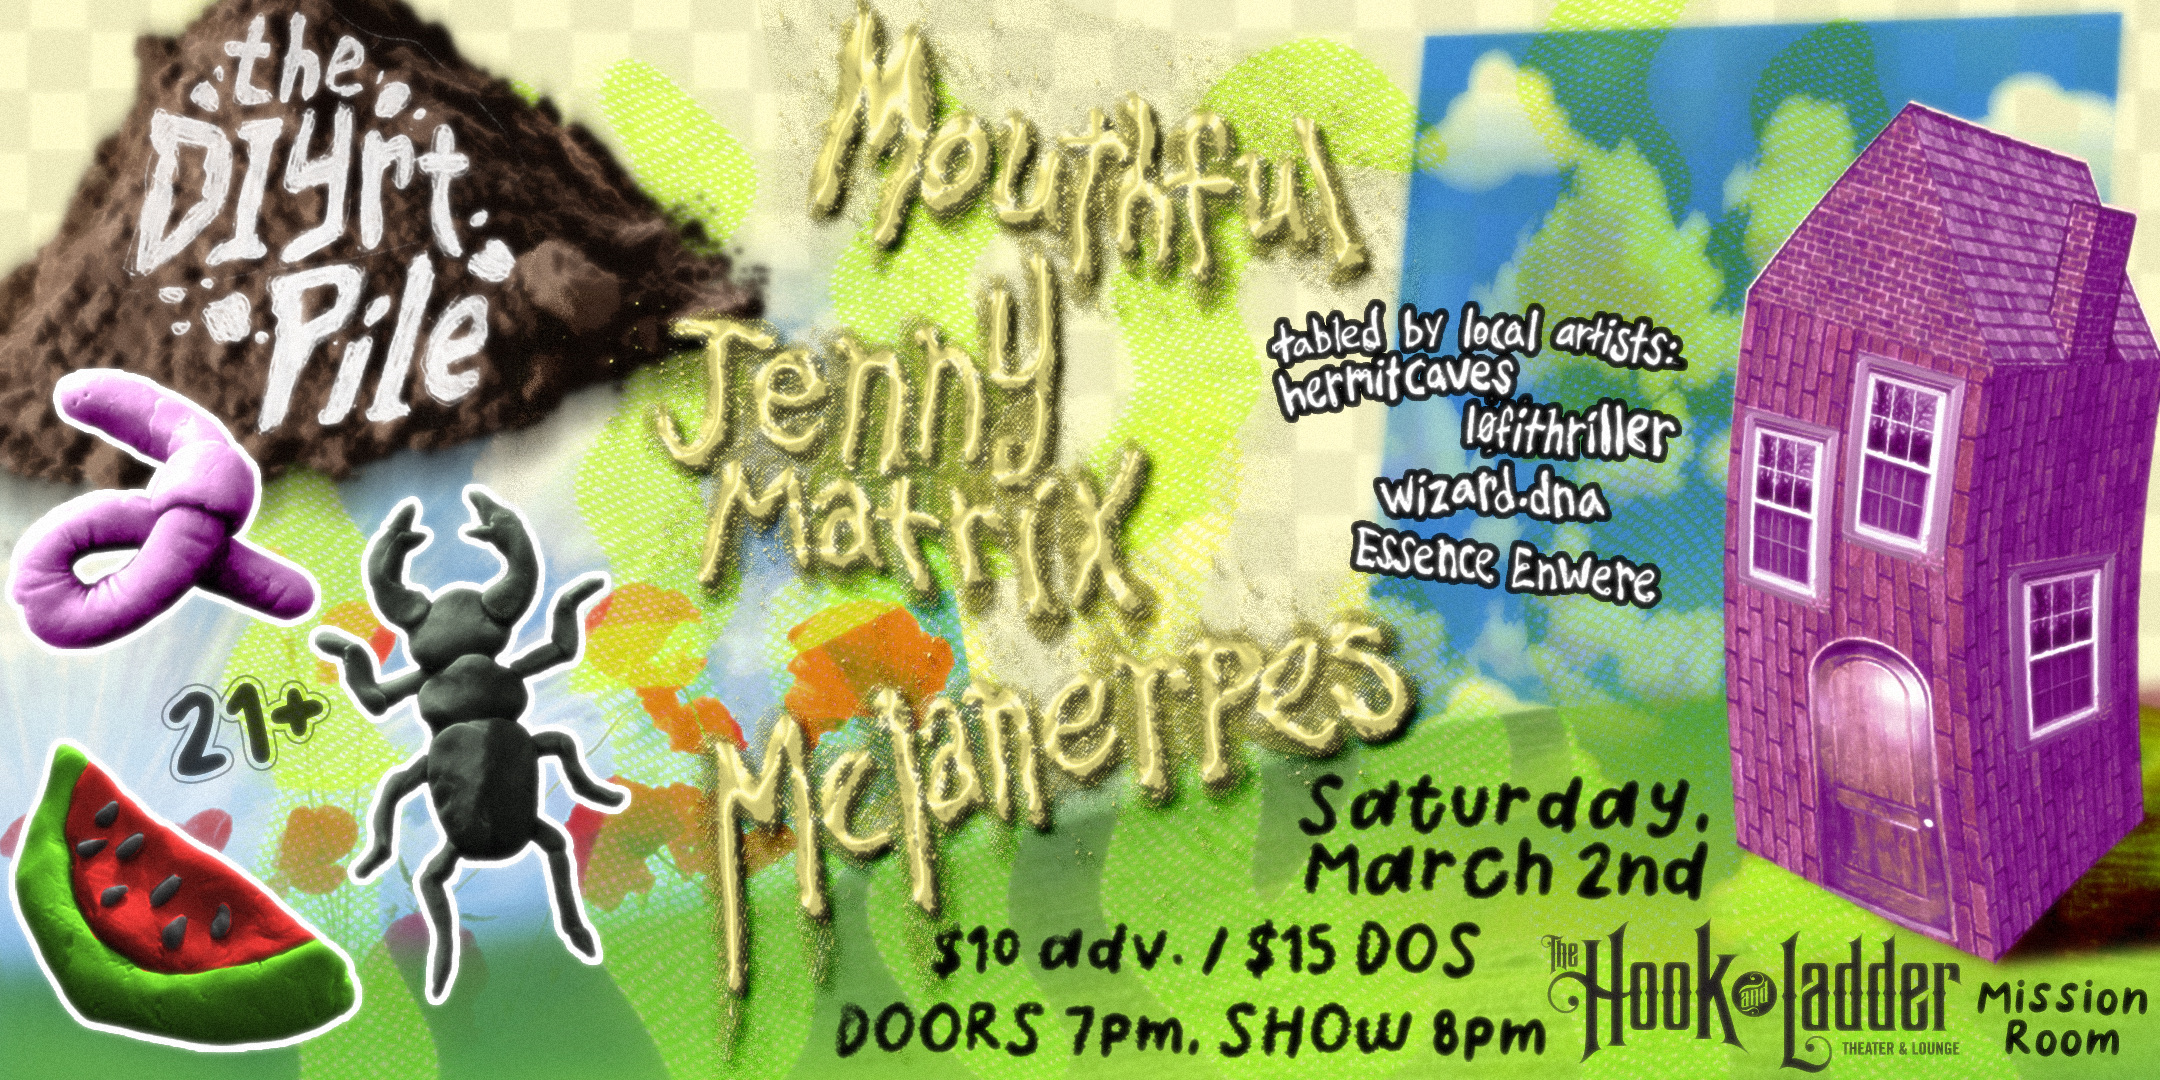 DIYrt Pile: DIY Art + Music with Mouthful, Jenny Matrix, & Melanerpes featuring art + zines by hermitcaves, l0fithriller, wizard.dna, & Essence Enwere Saturday, March 2 The Mission Room at The Hook and Ladder Theater Doors 7:00pm :: Music 8:00pm :: 21+ $10 ADV / $15 DOS